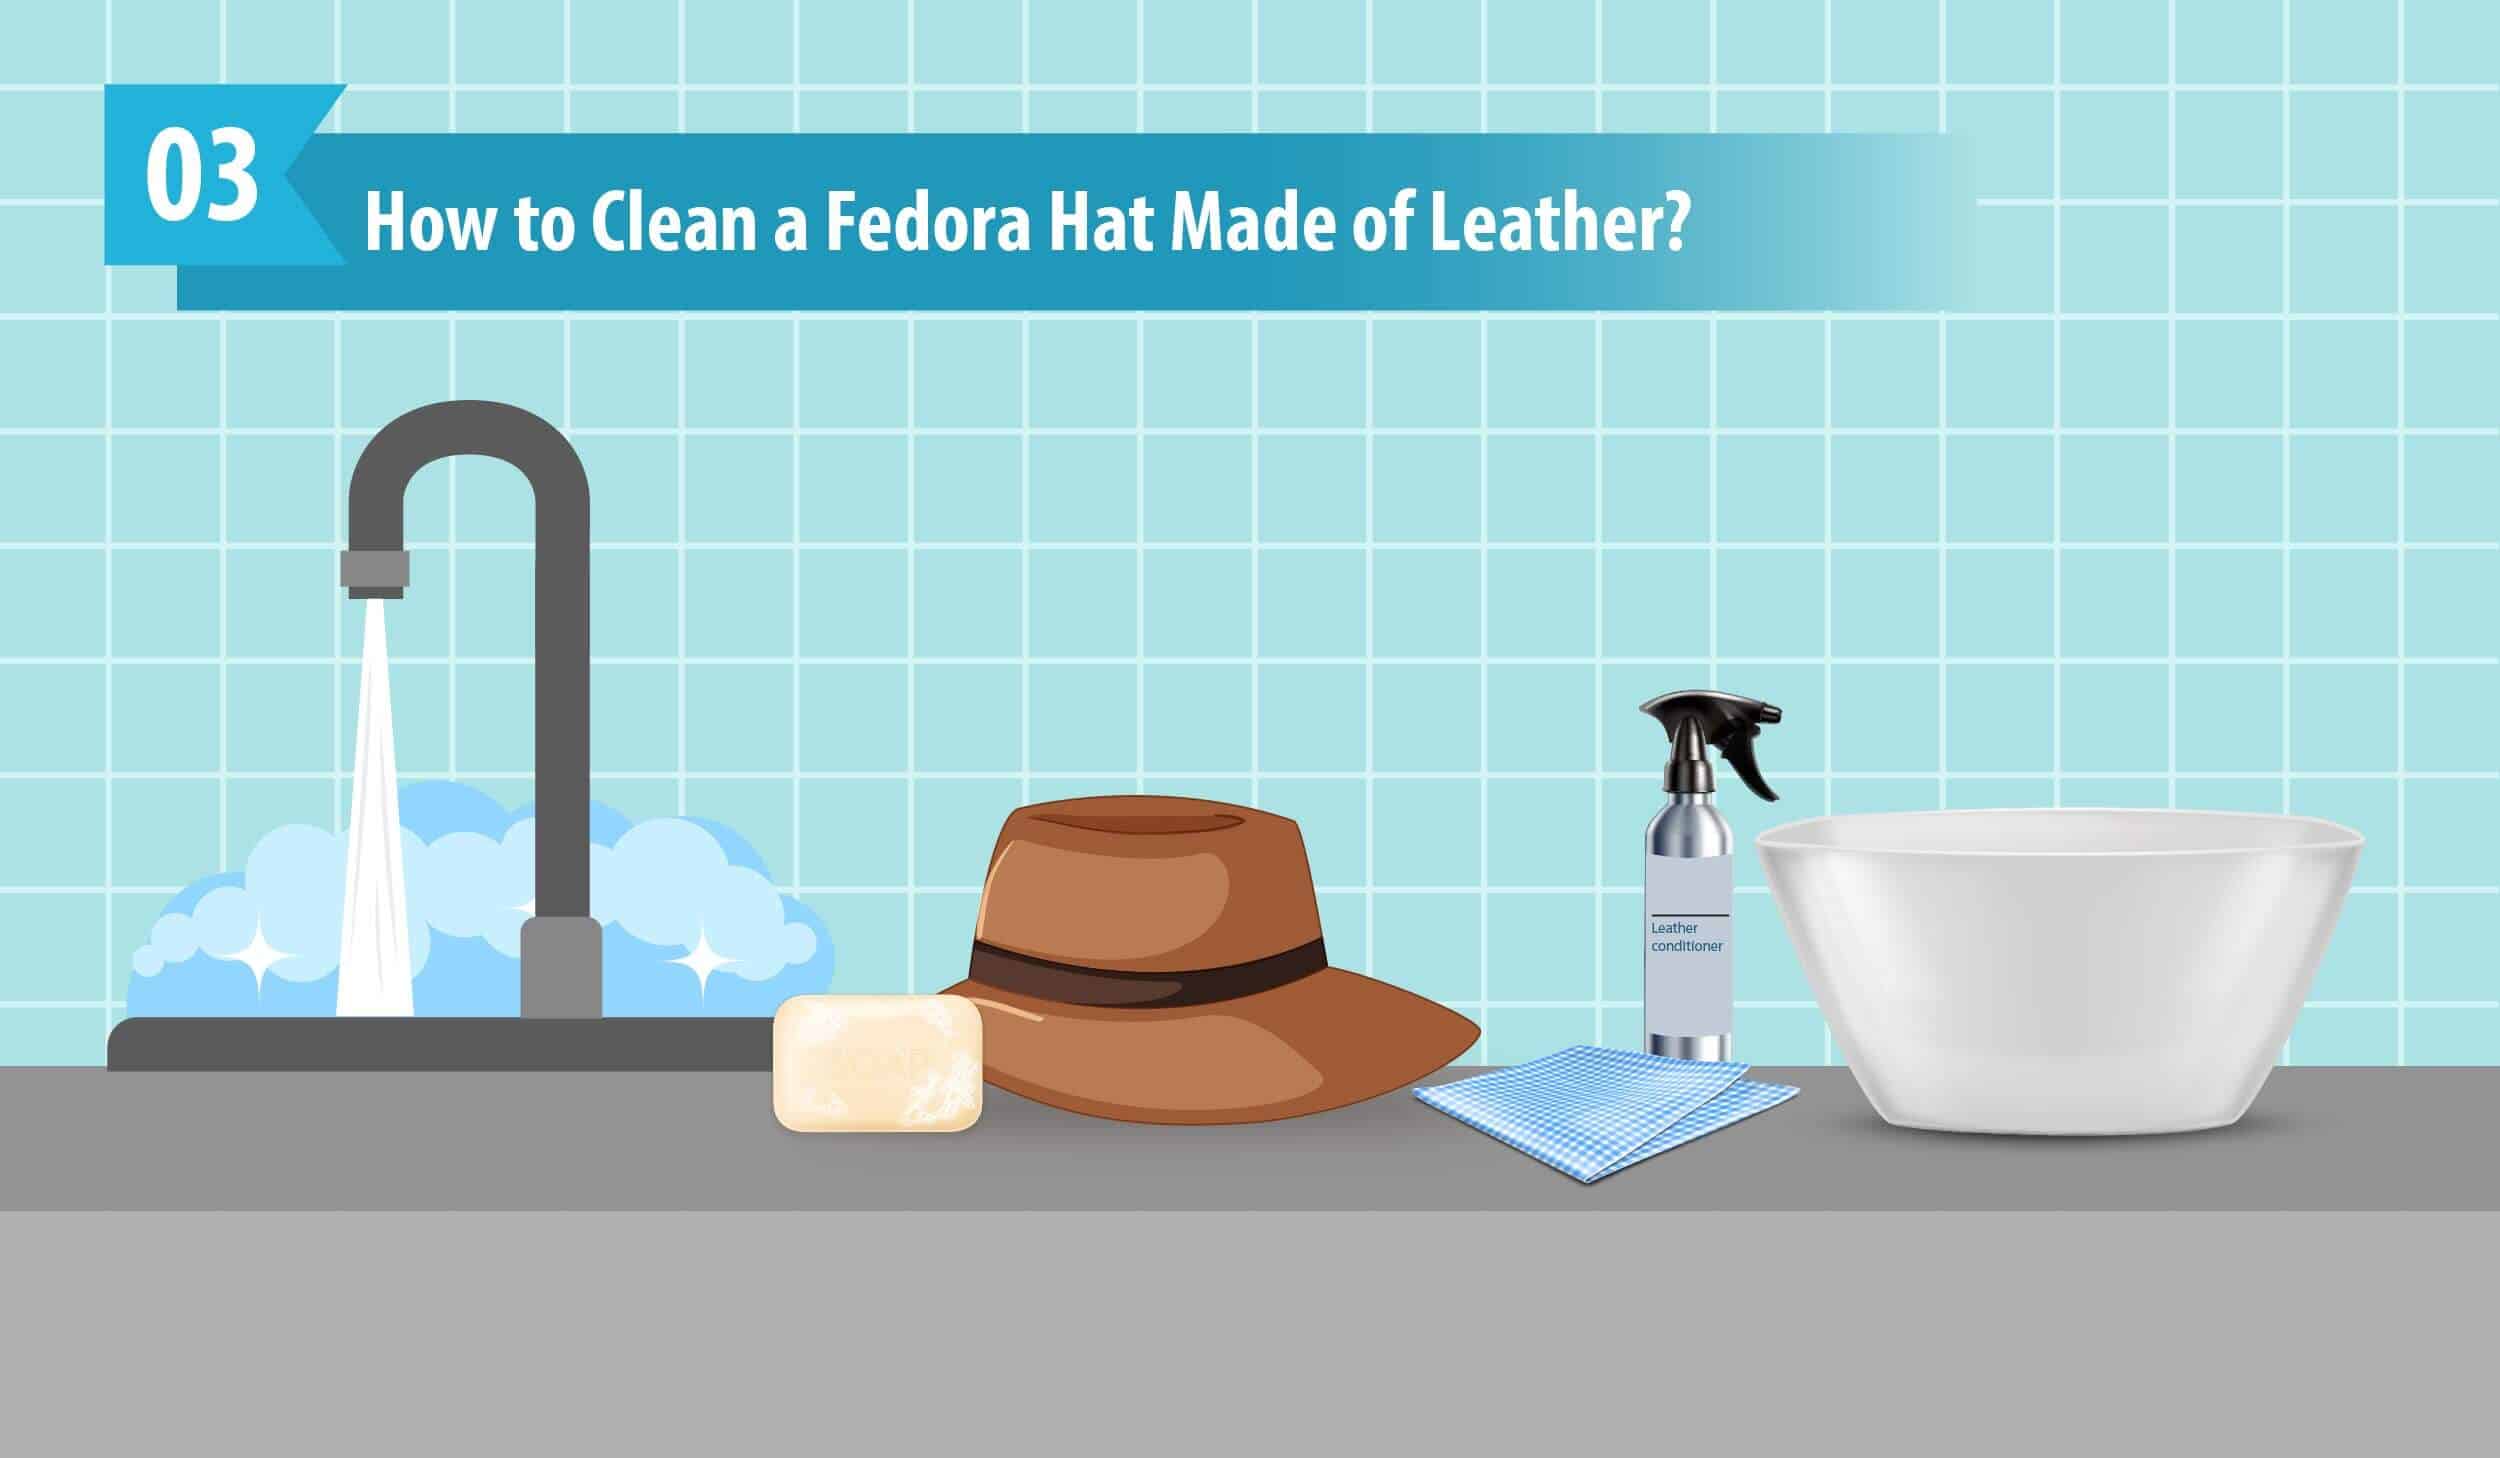 How to Clean a Fedora Hat Made of Leather